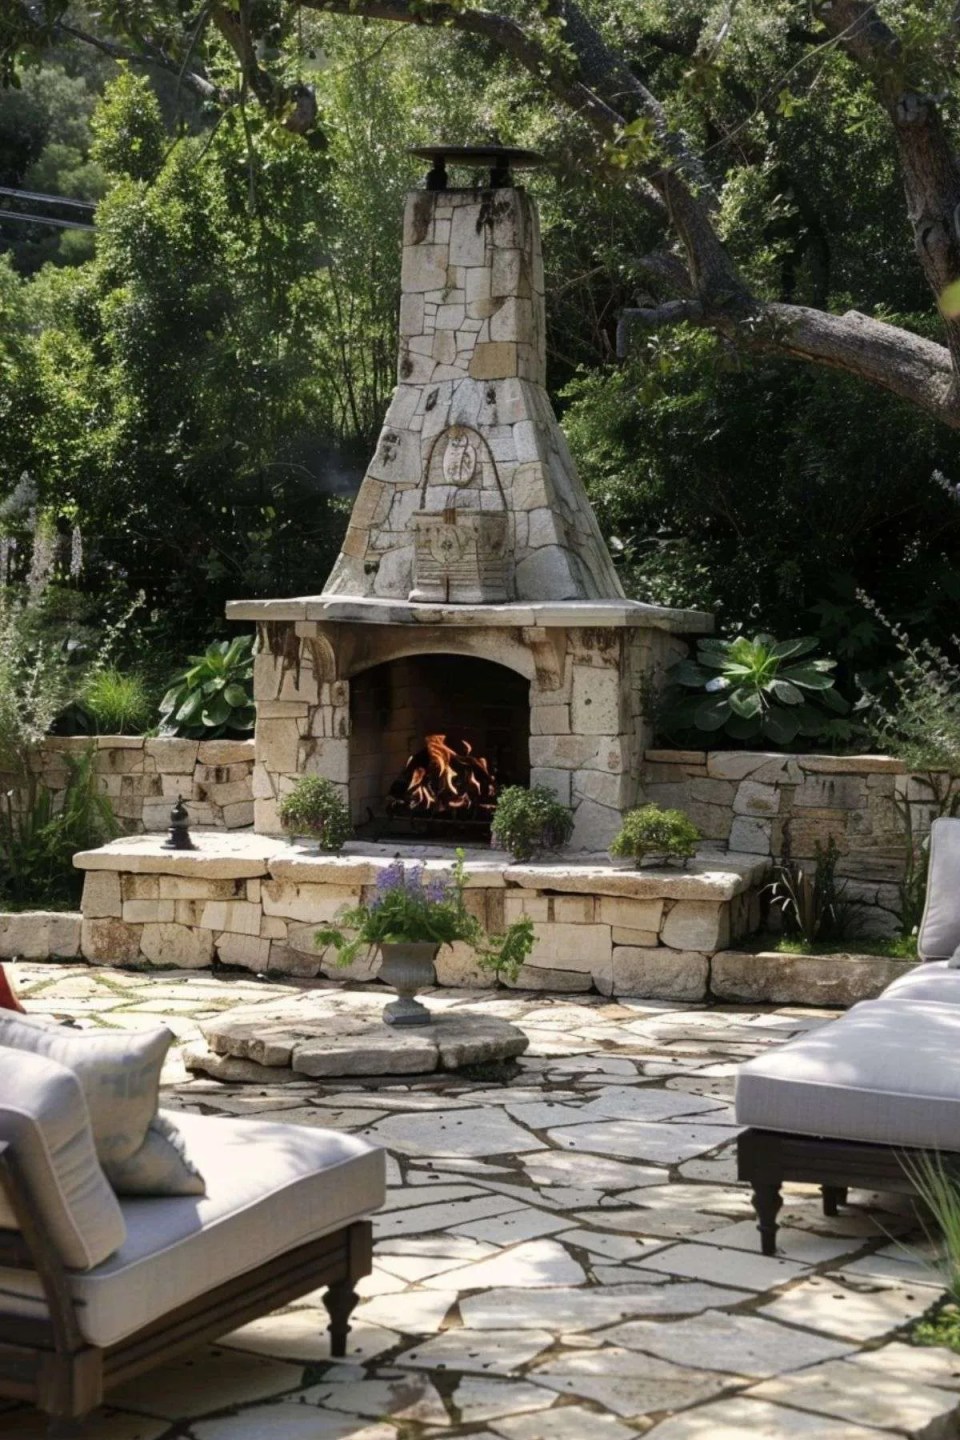 a fireplace in a garden with stone patio and seating